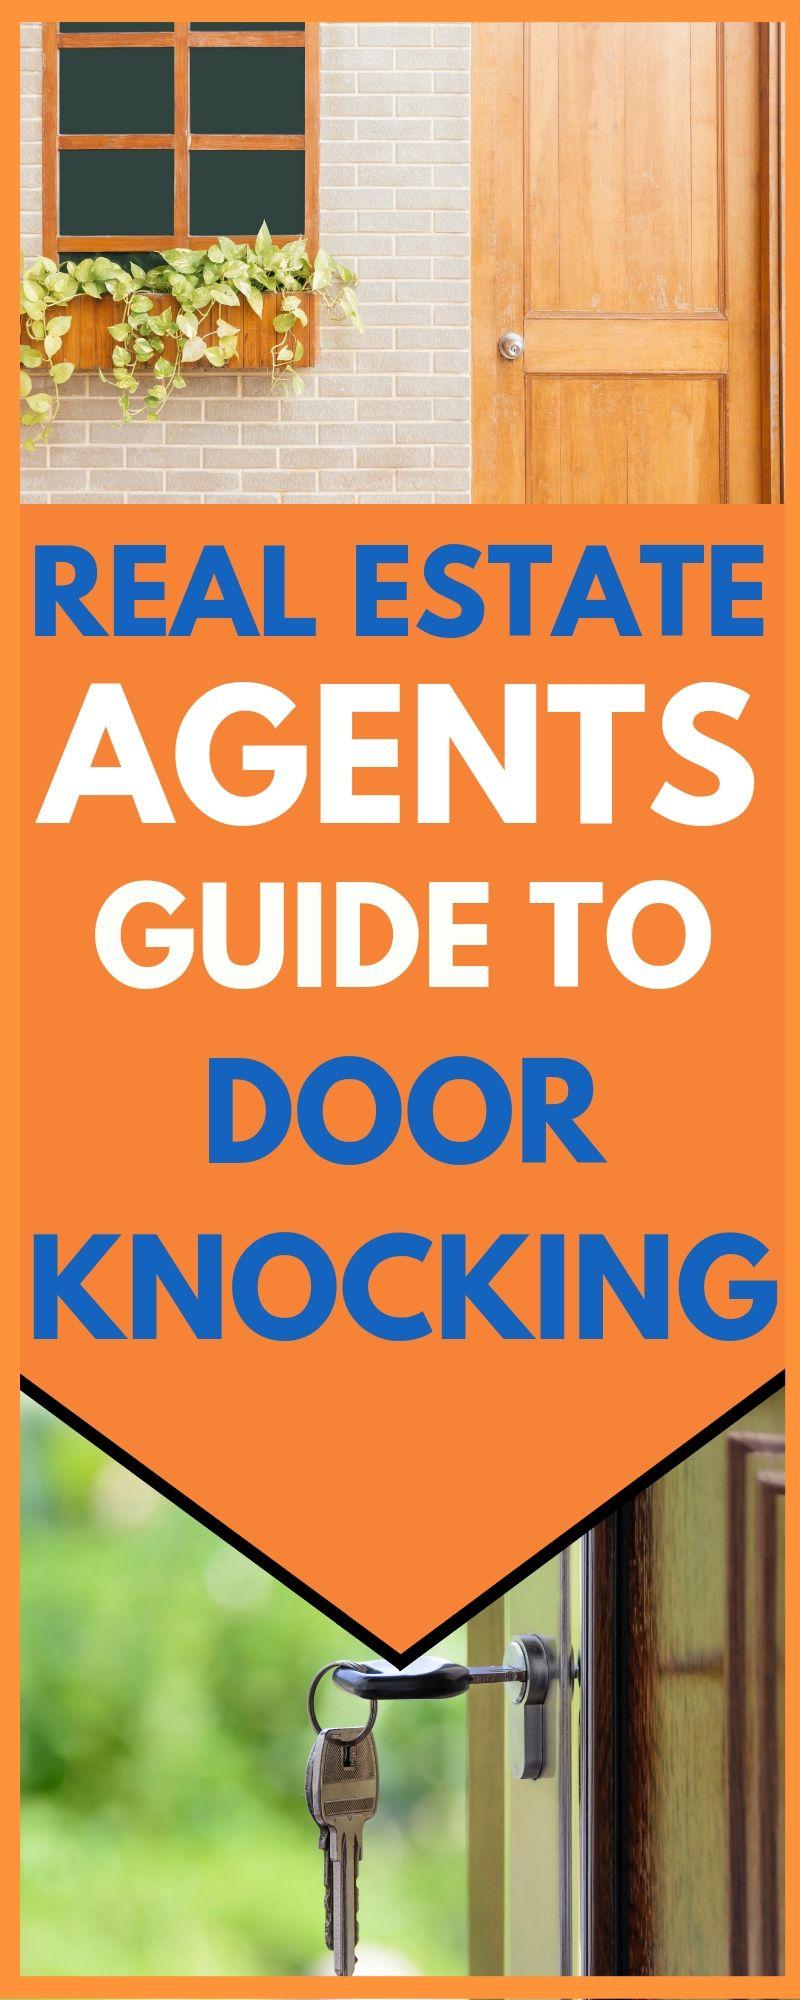 Why do you door knock in real estate